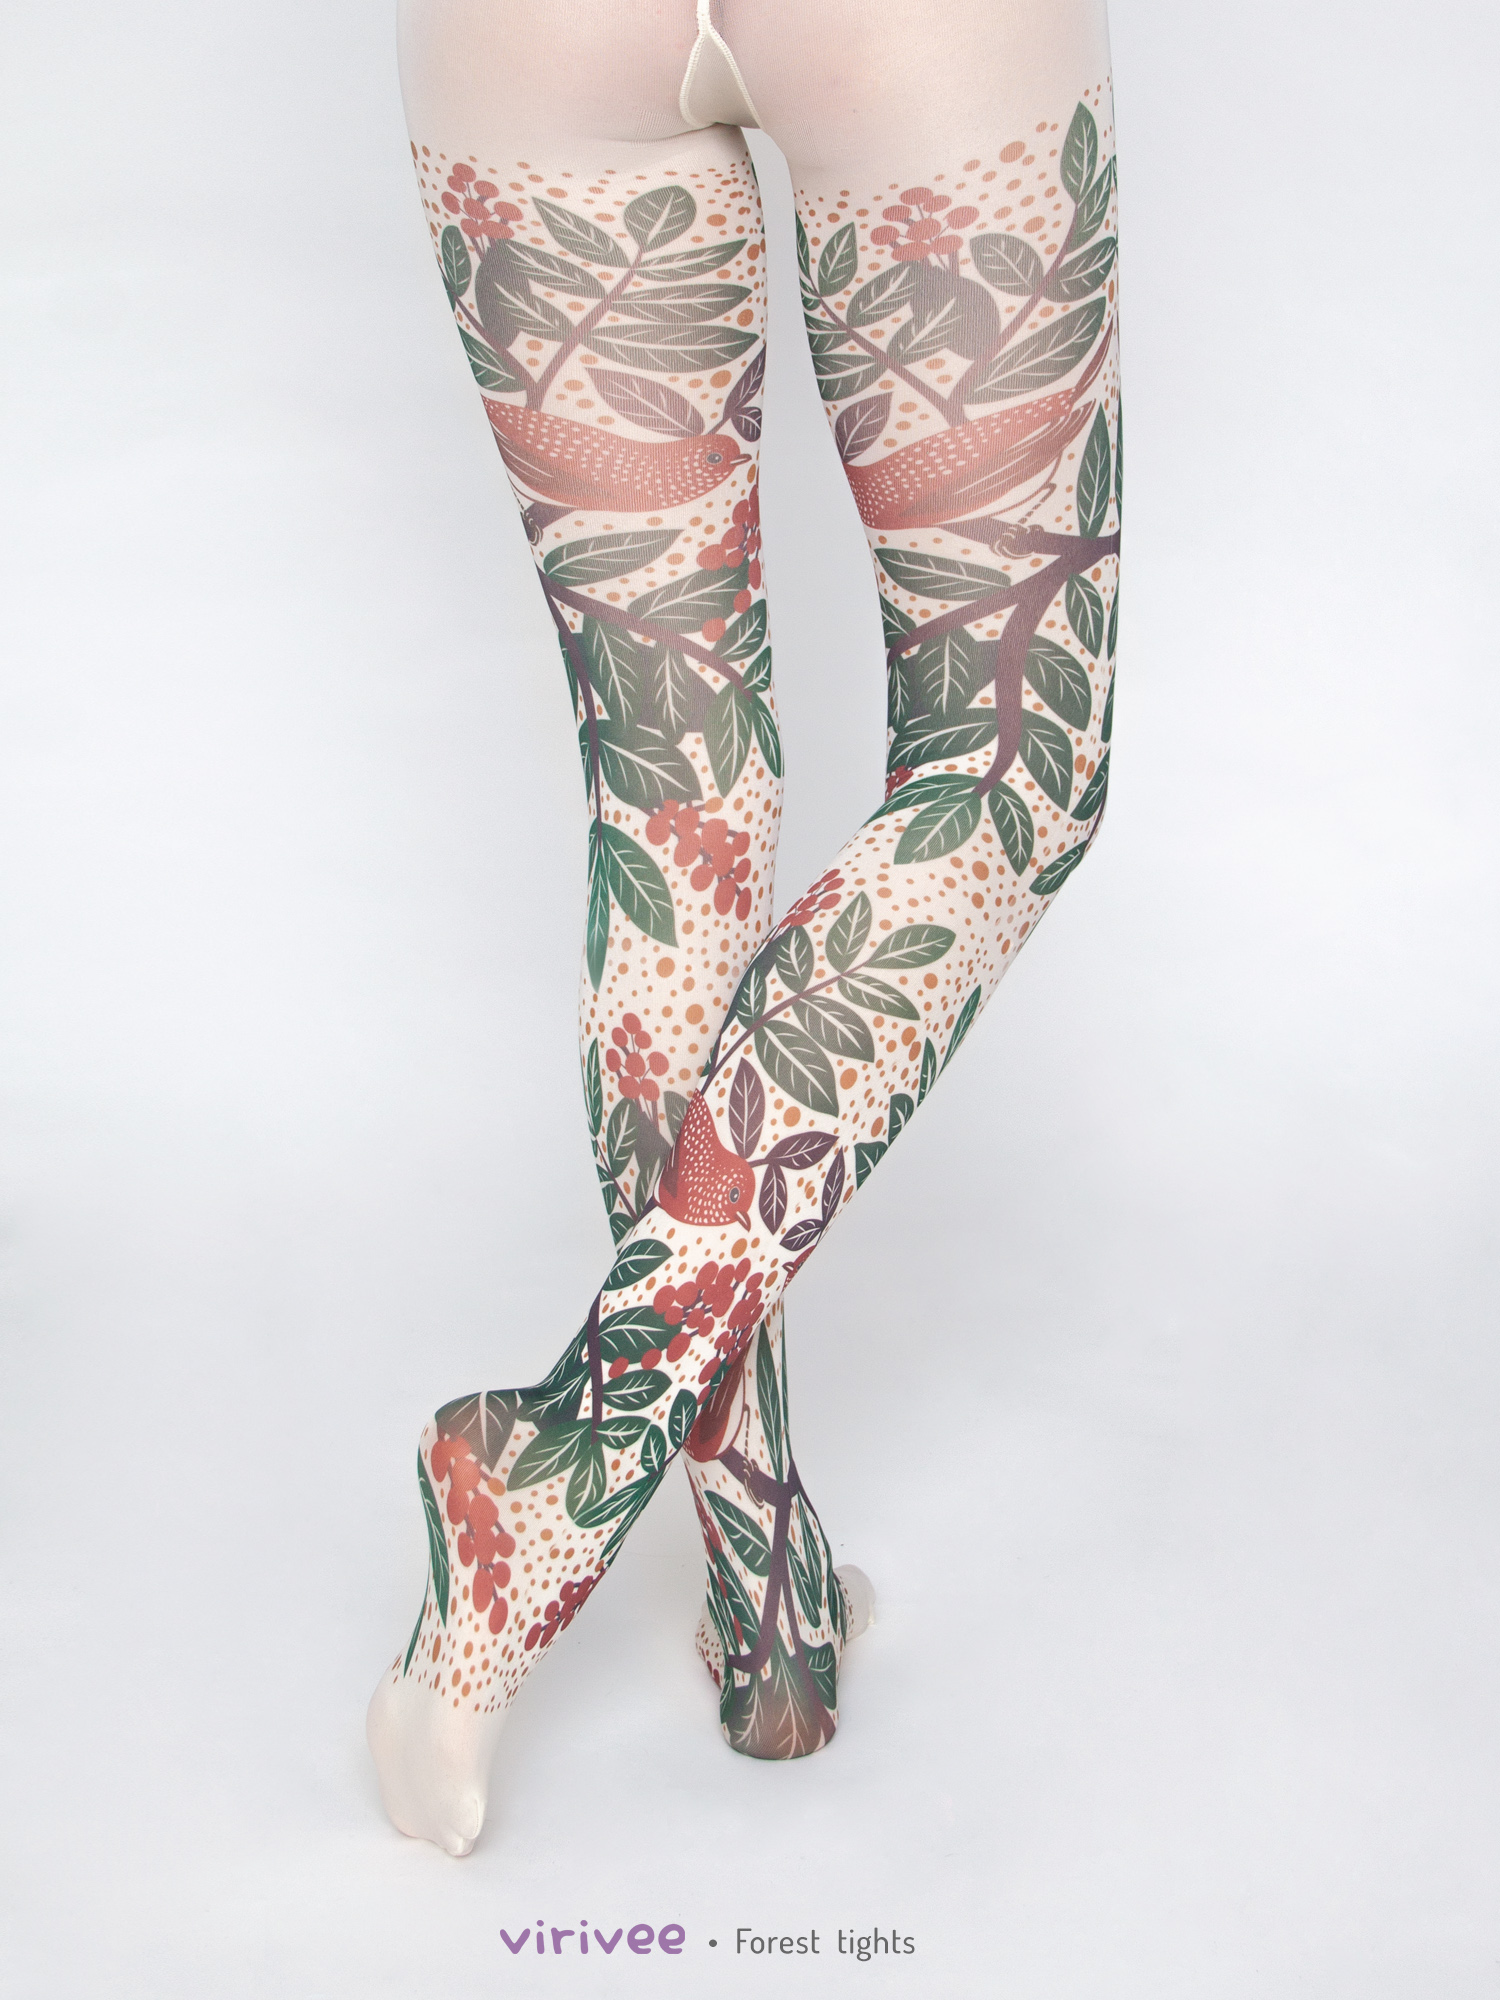 Colorful forest tights - Virivee Tights - Unique tights designed and made  in Europe